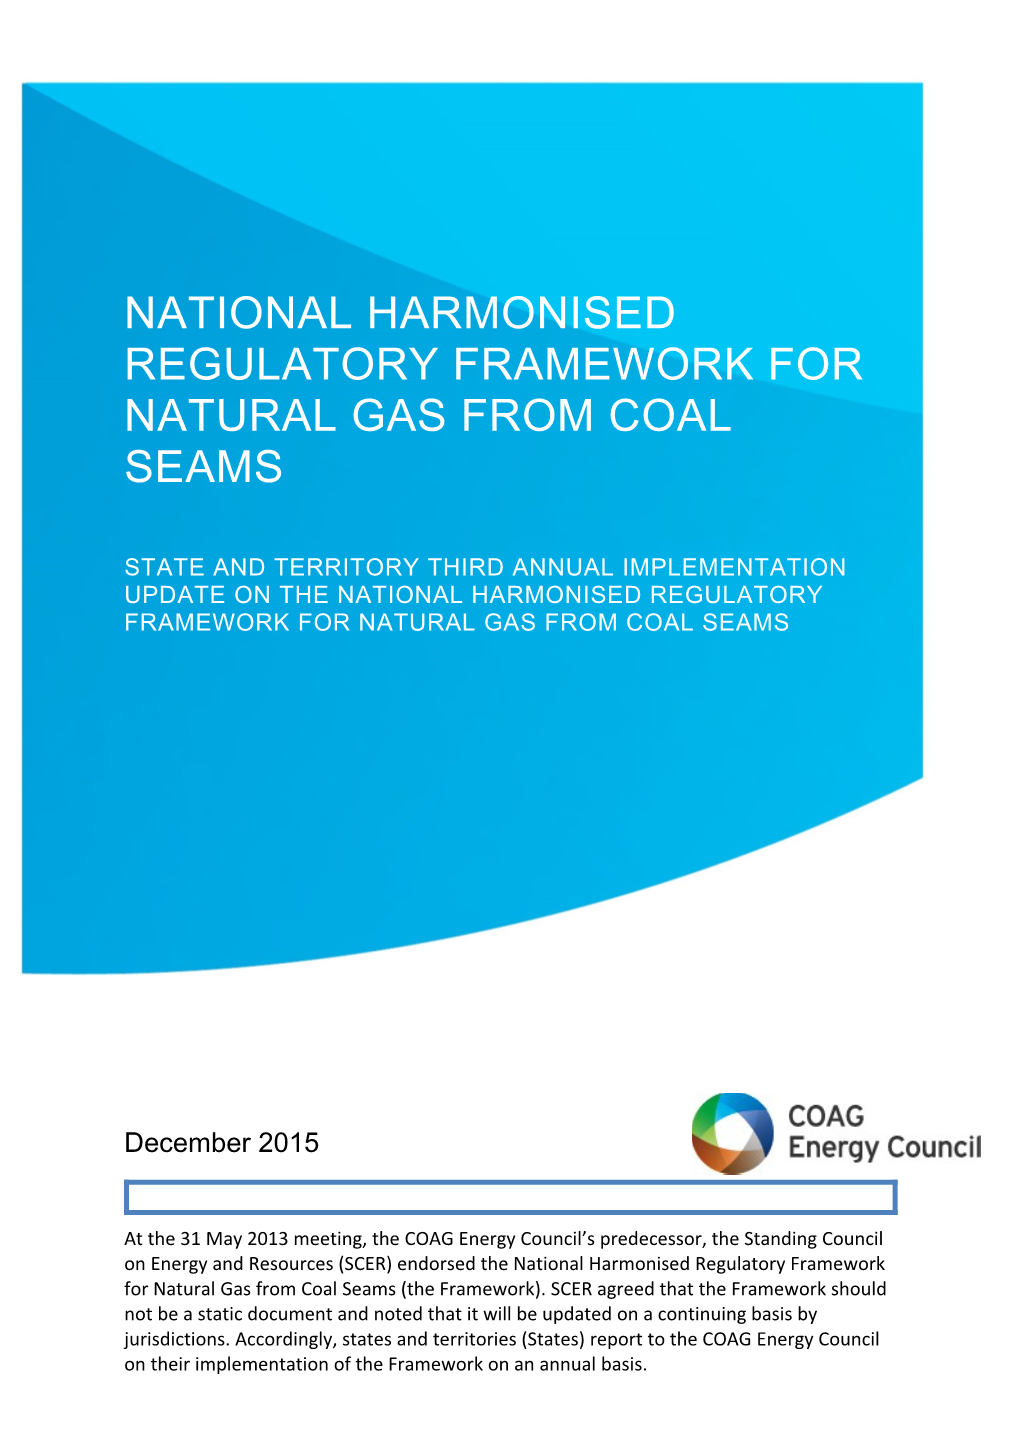 National Harmonised Regulatory Framework for Natural Gas from Coal Seams